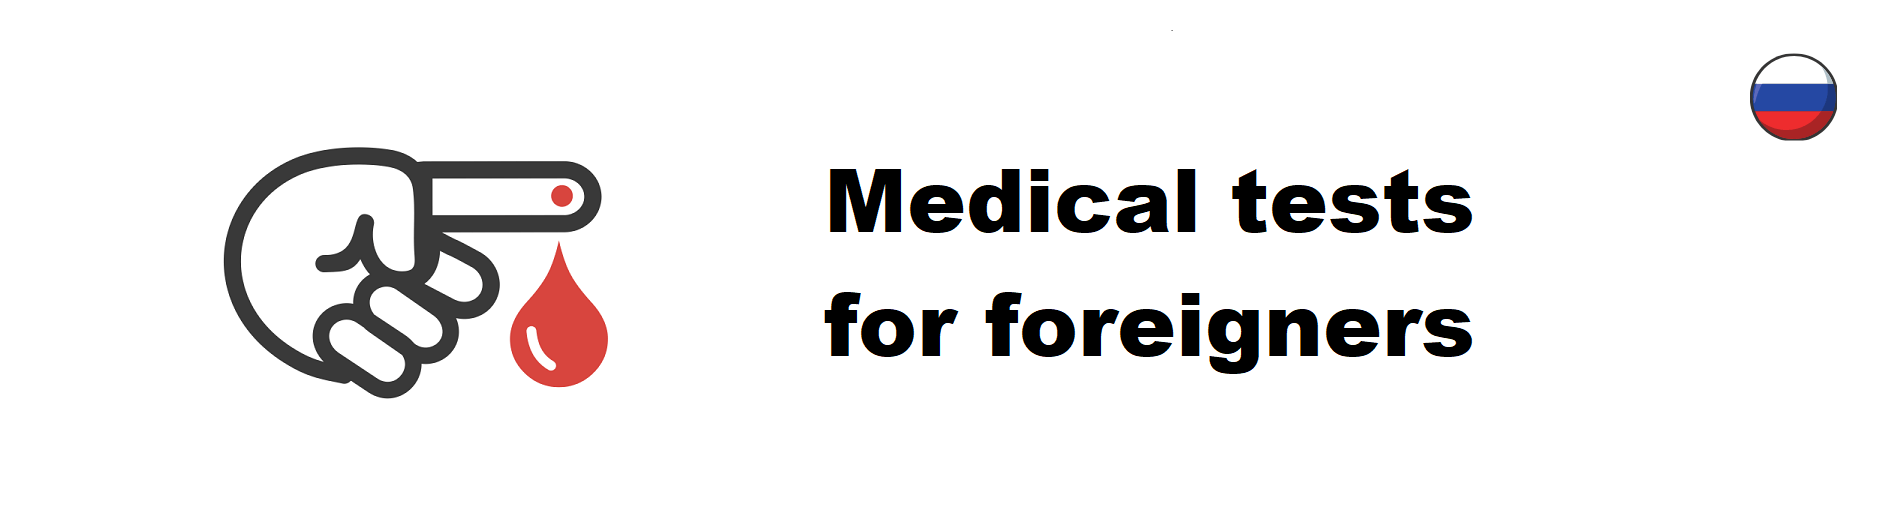 Mandatory medical tests for foreigners in Russia - Juralink